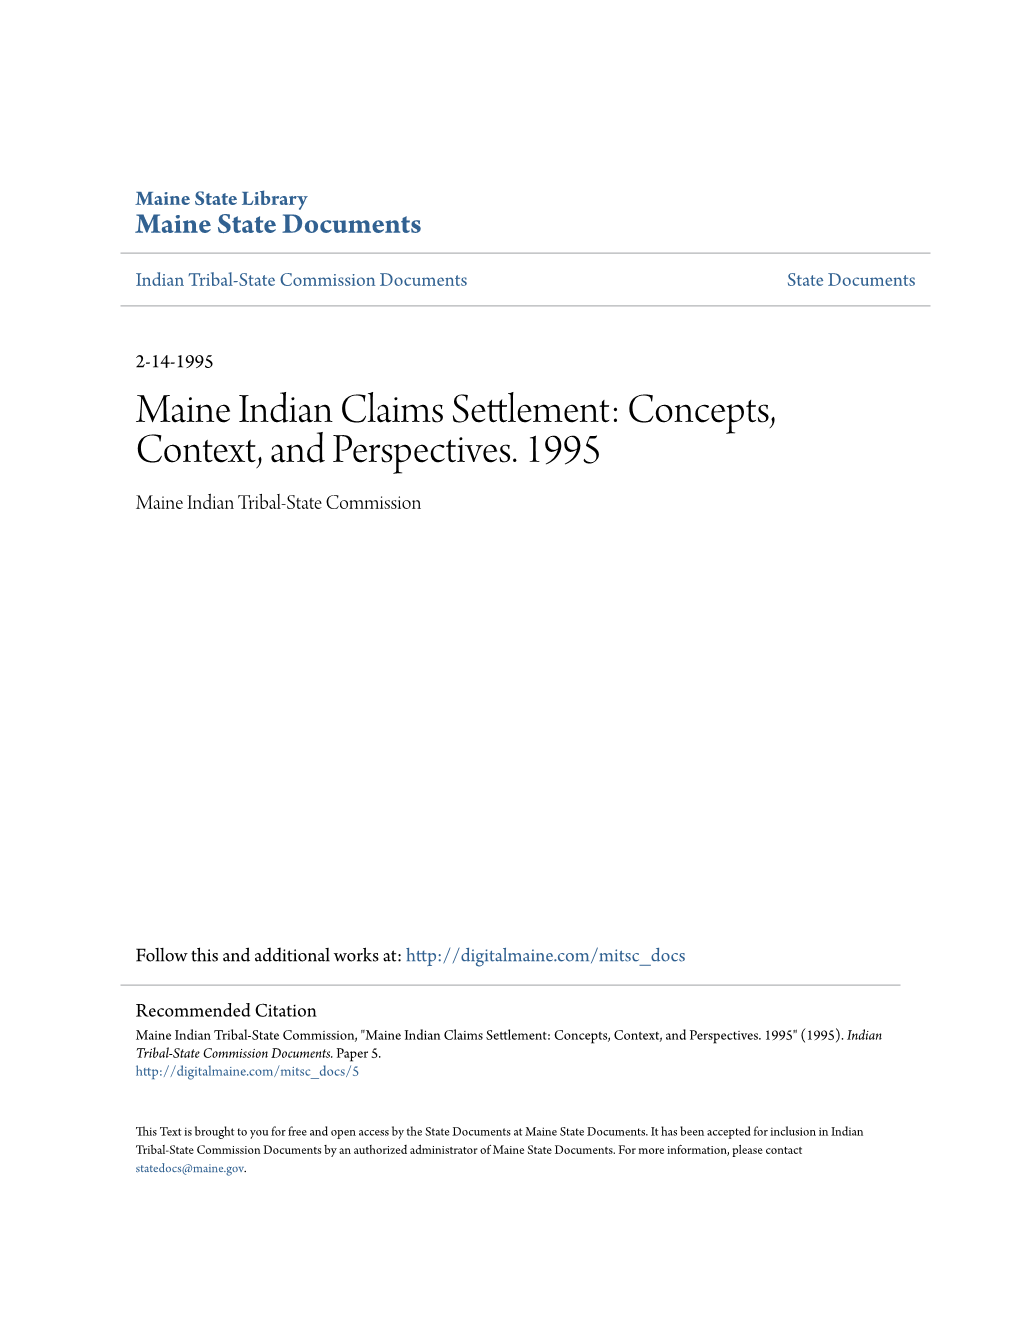 Maine Indian Claims Settlement: Concepts, Context, and Perspectives. 1995 Maine Indian Tribal-State Commission